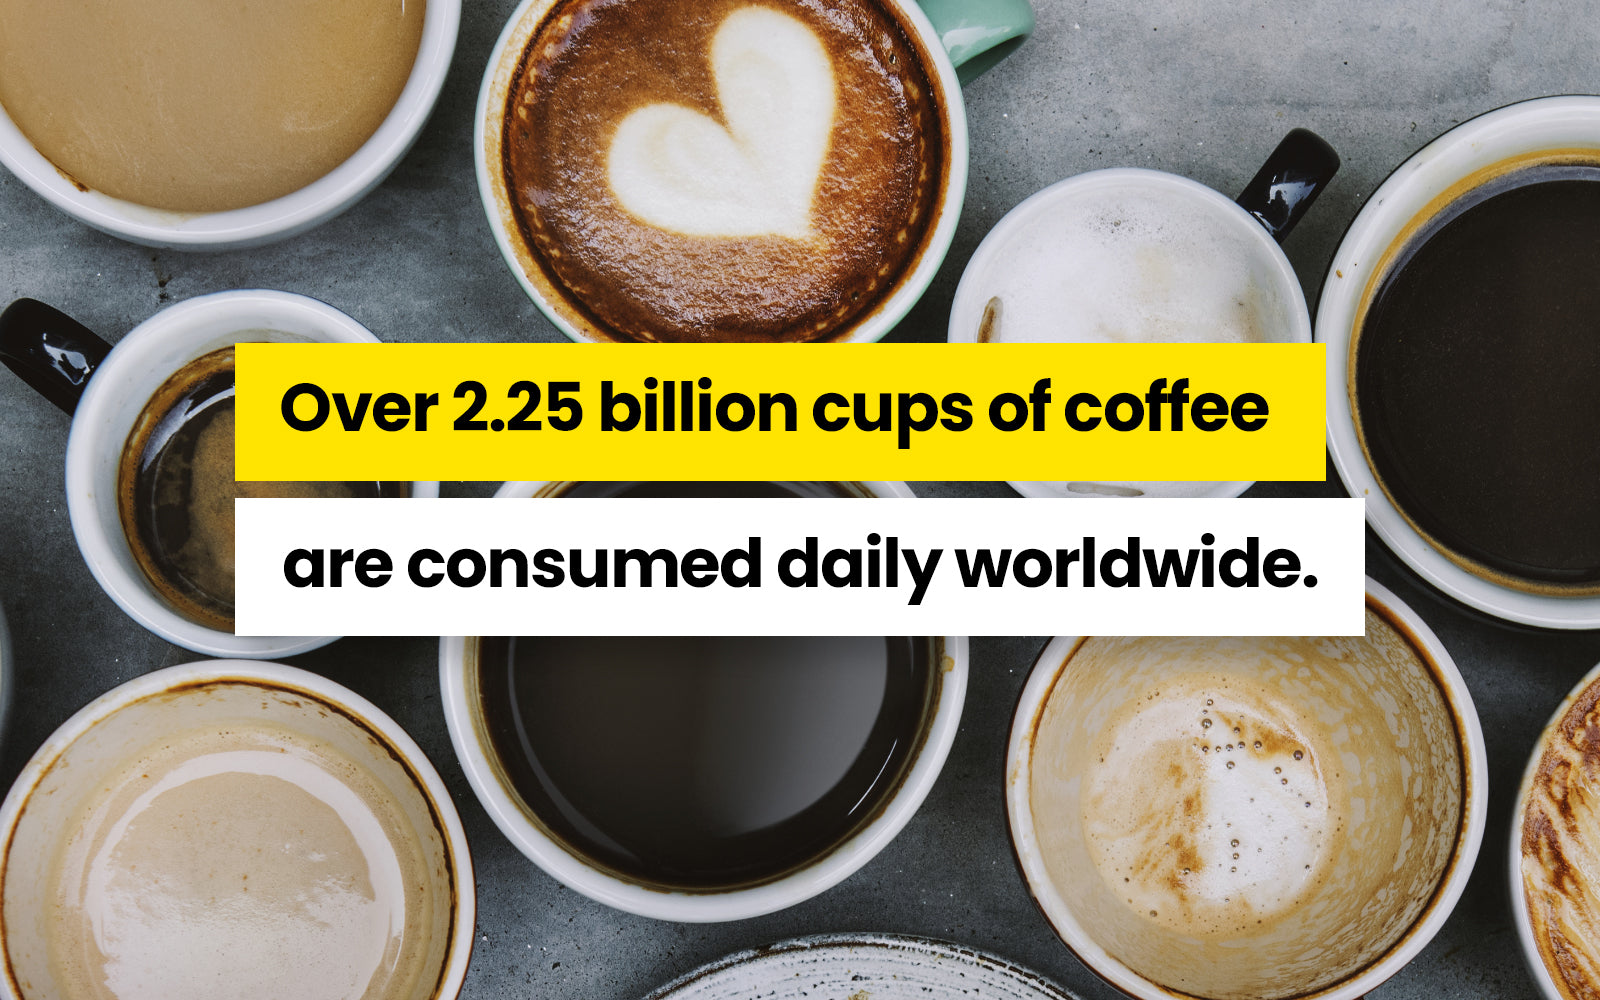 Coffee consumed in the USA